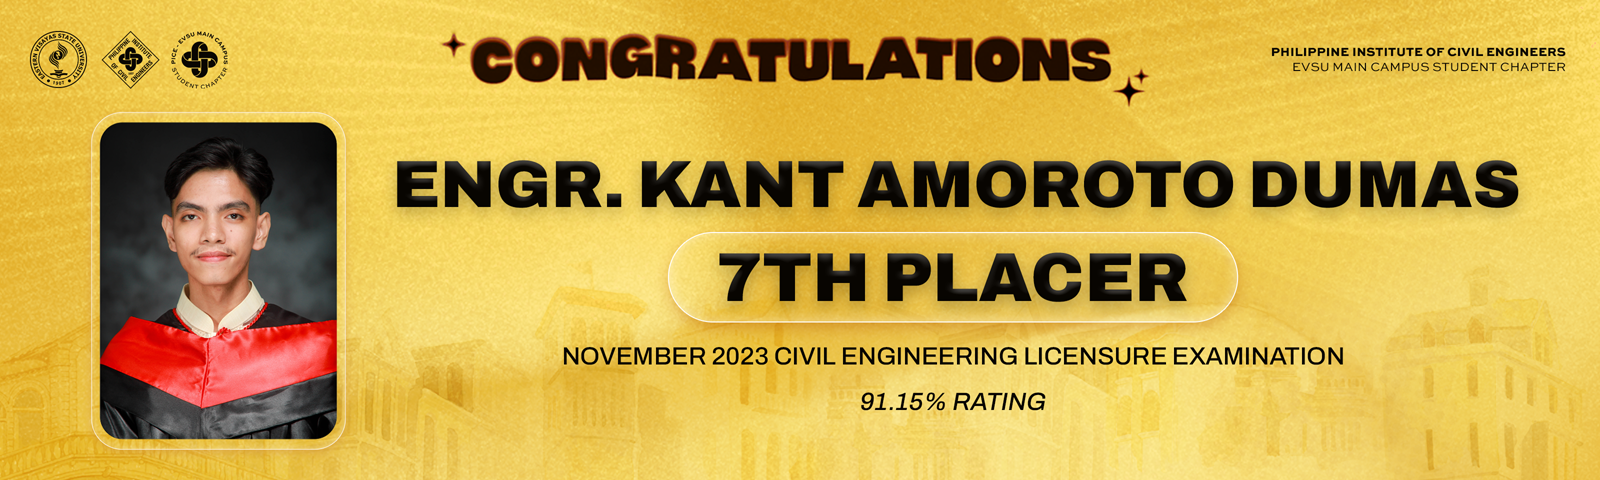 Congratulations! To our newly registered civil engineers